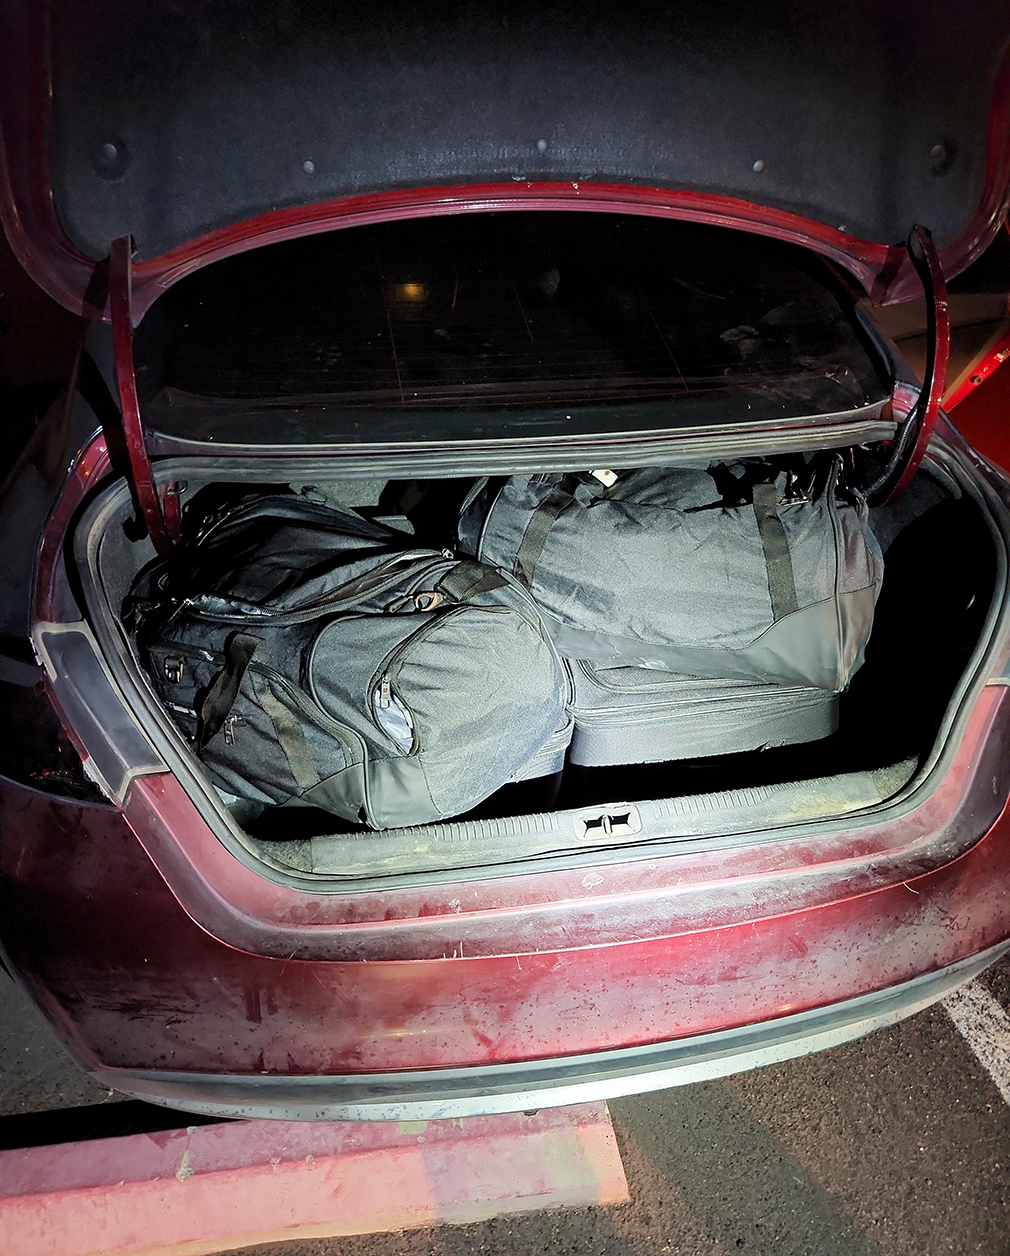 Trunk of suspect vehicle